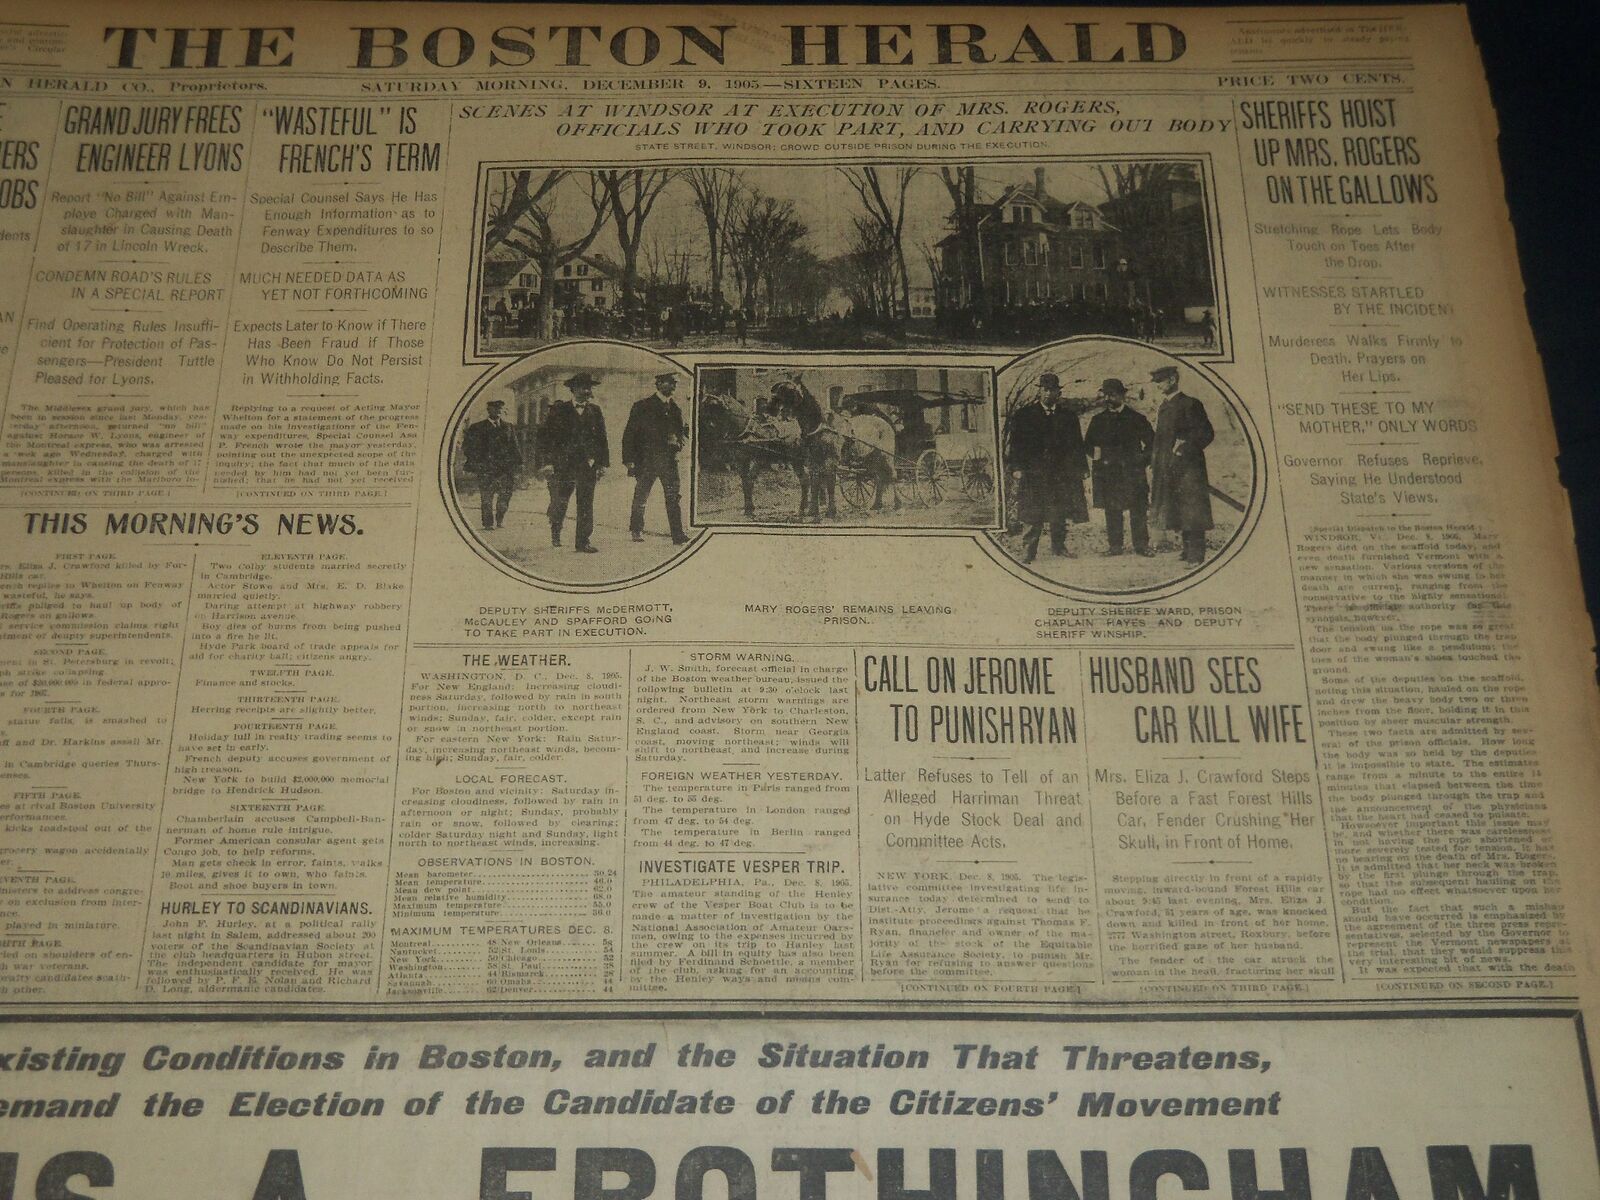 1905 DECEMBER 9 THE BOSTON HERALD NEWSPAPER- MRS. ROGERS OF THE GALLOWS - BH 270